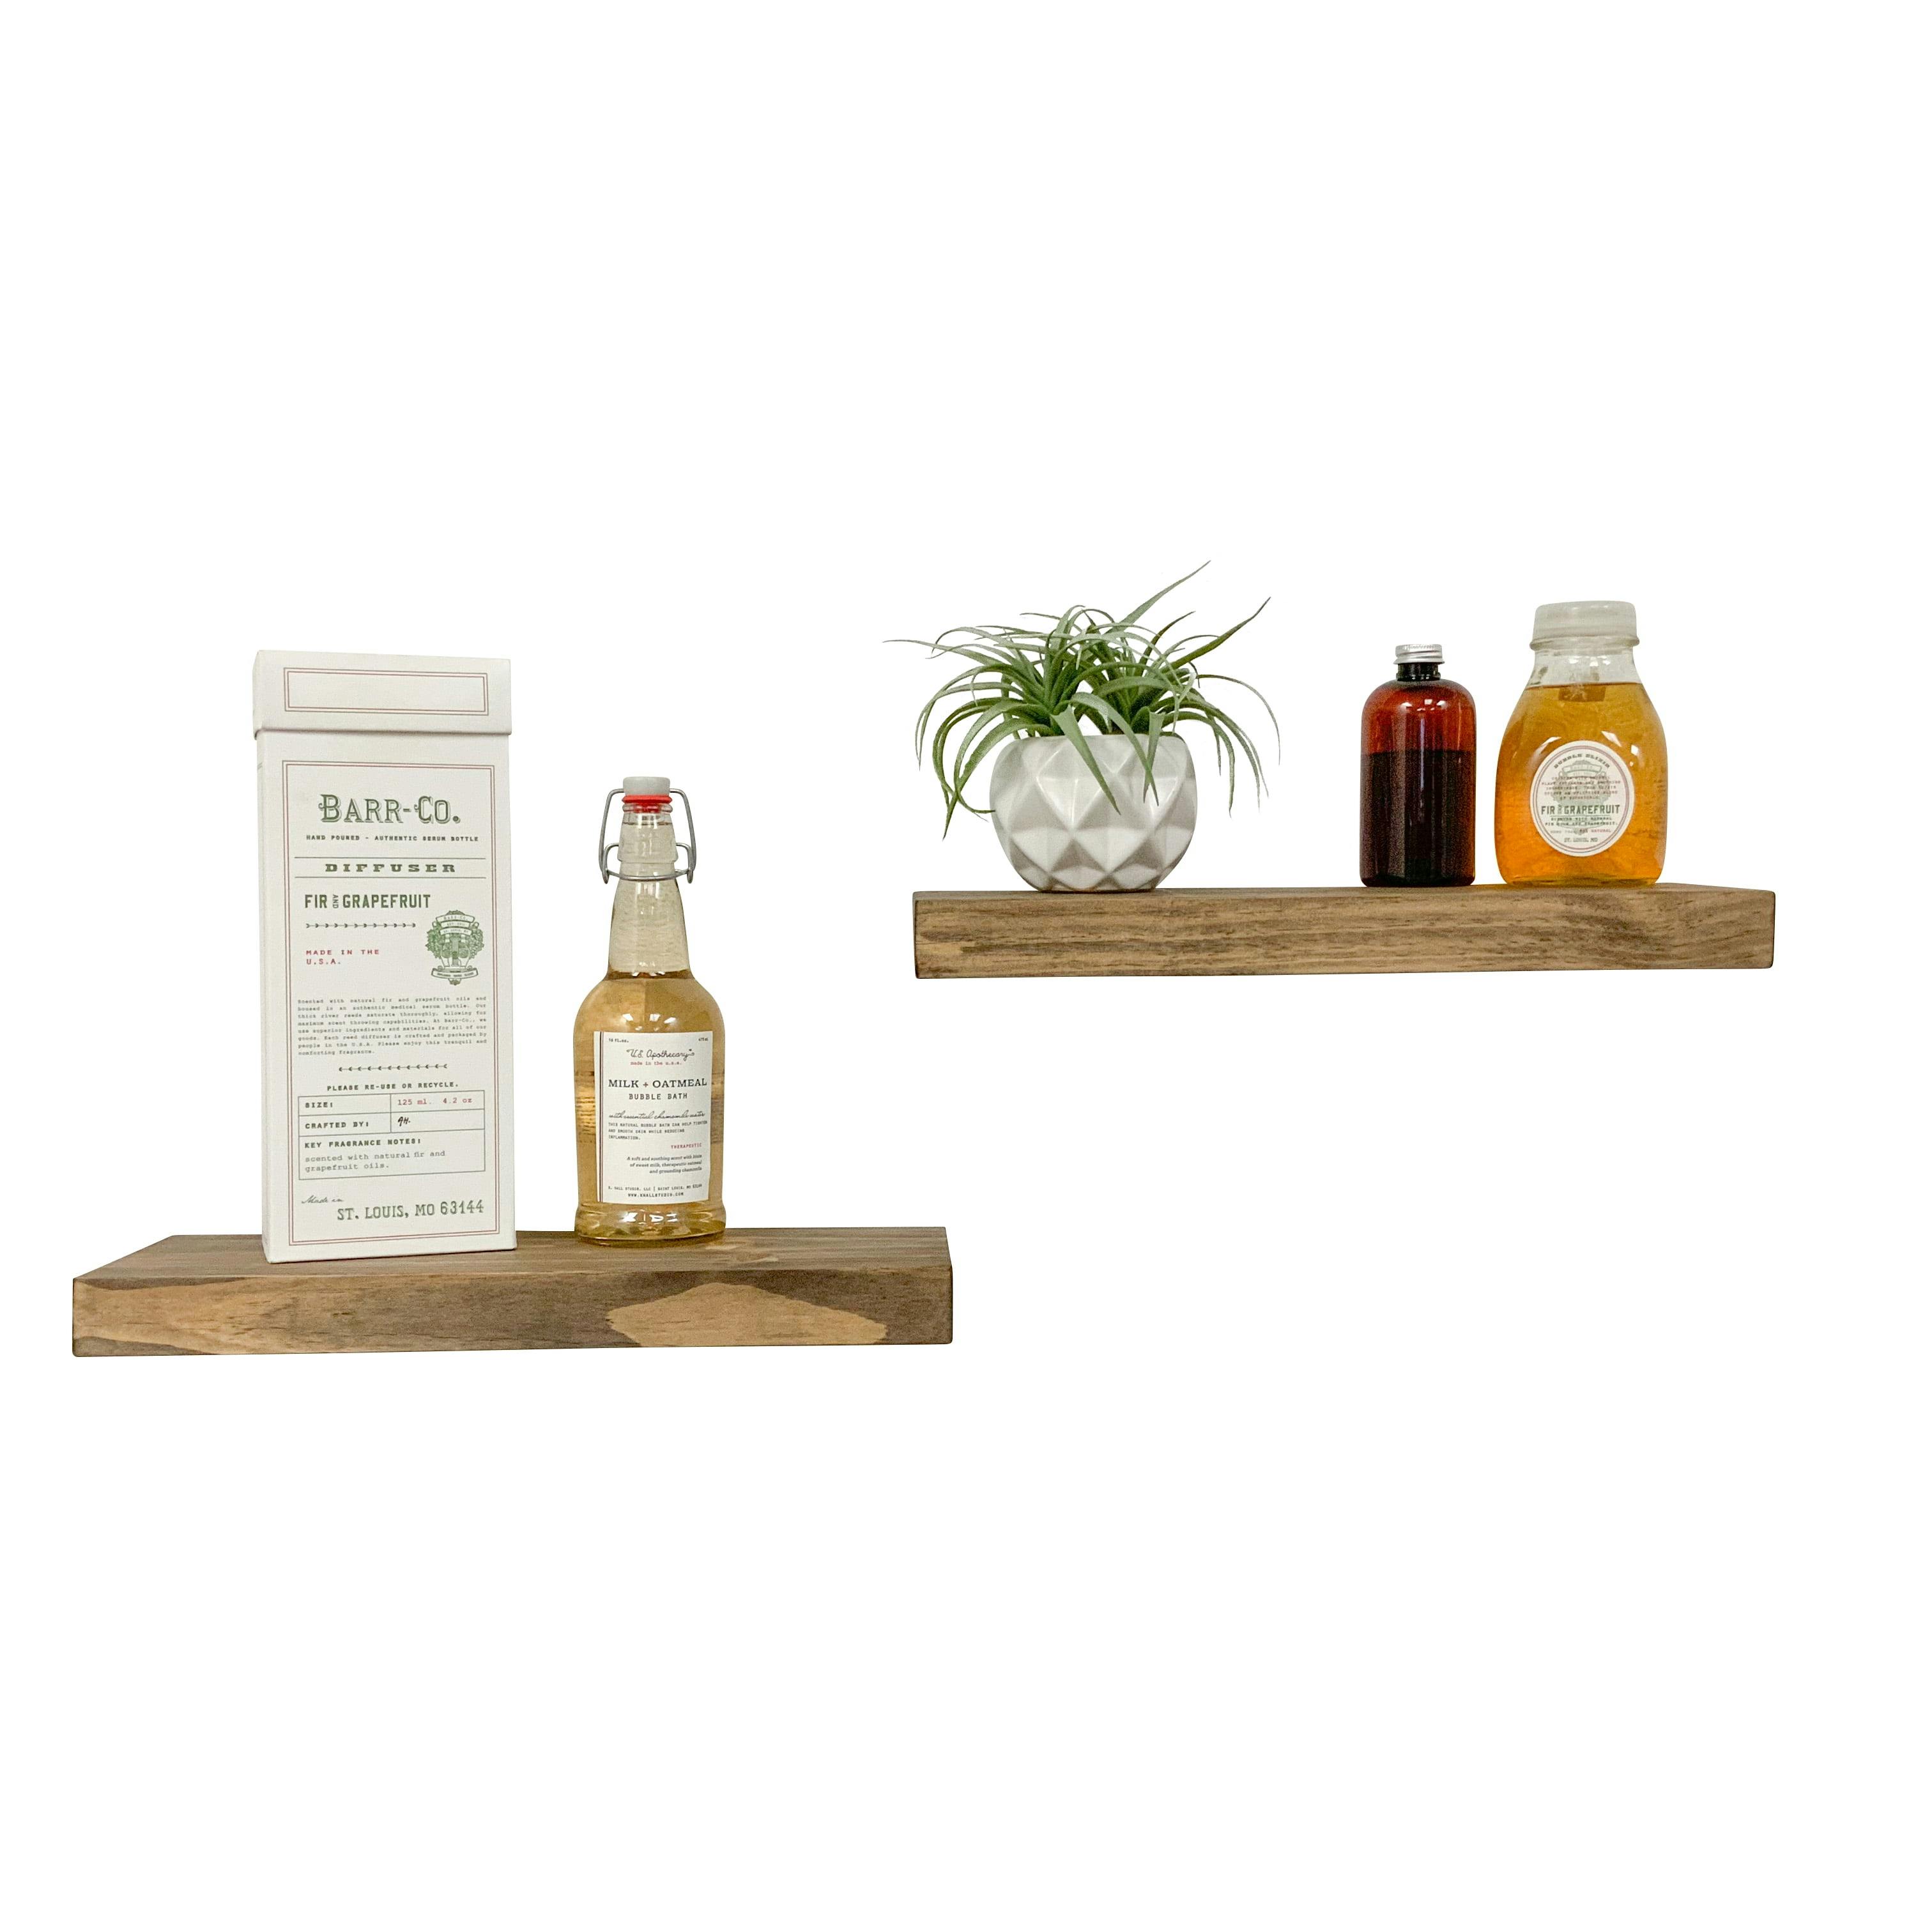 Grant 2 Piece Rectangle Pine Solid Wood Floating Shelf